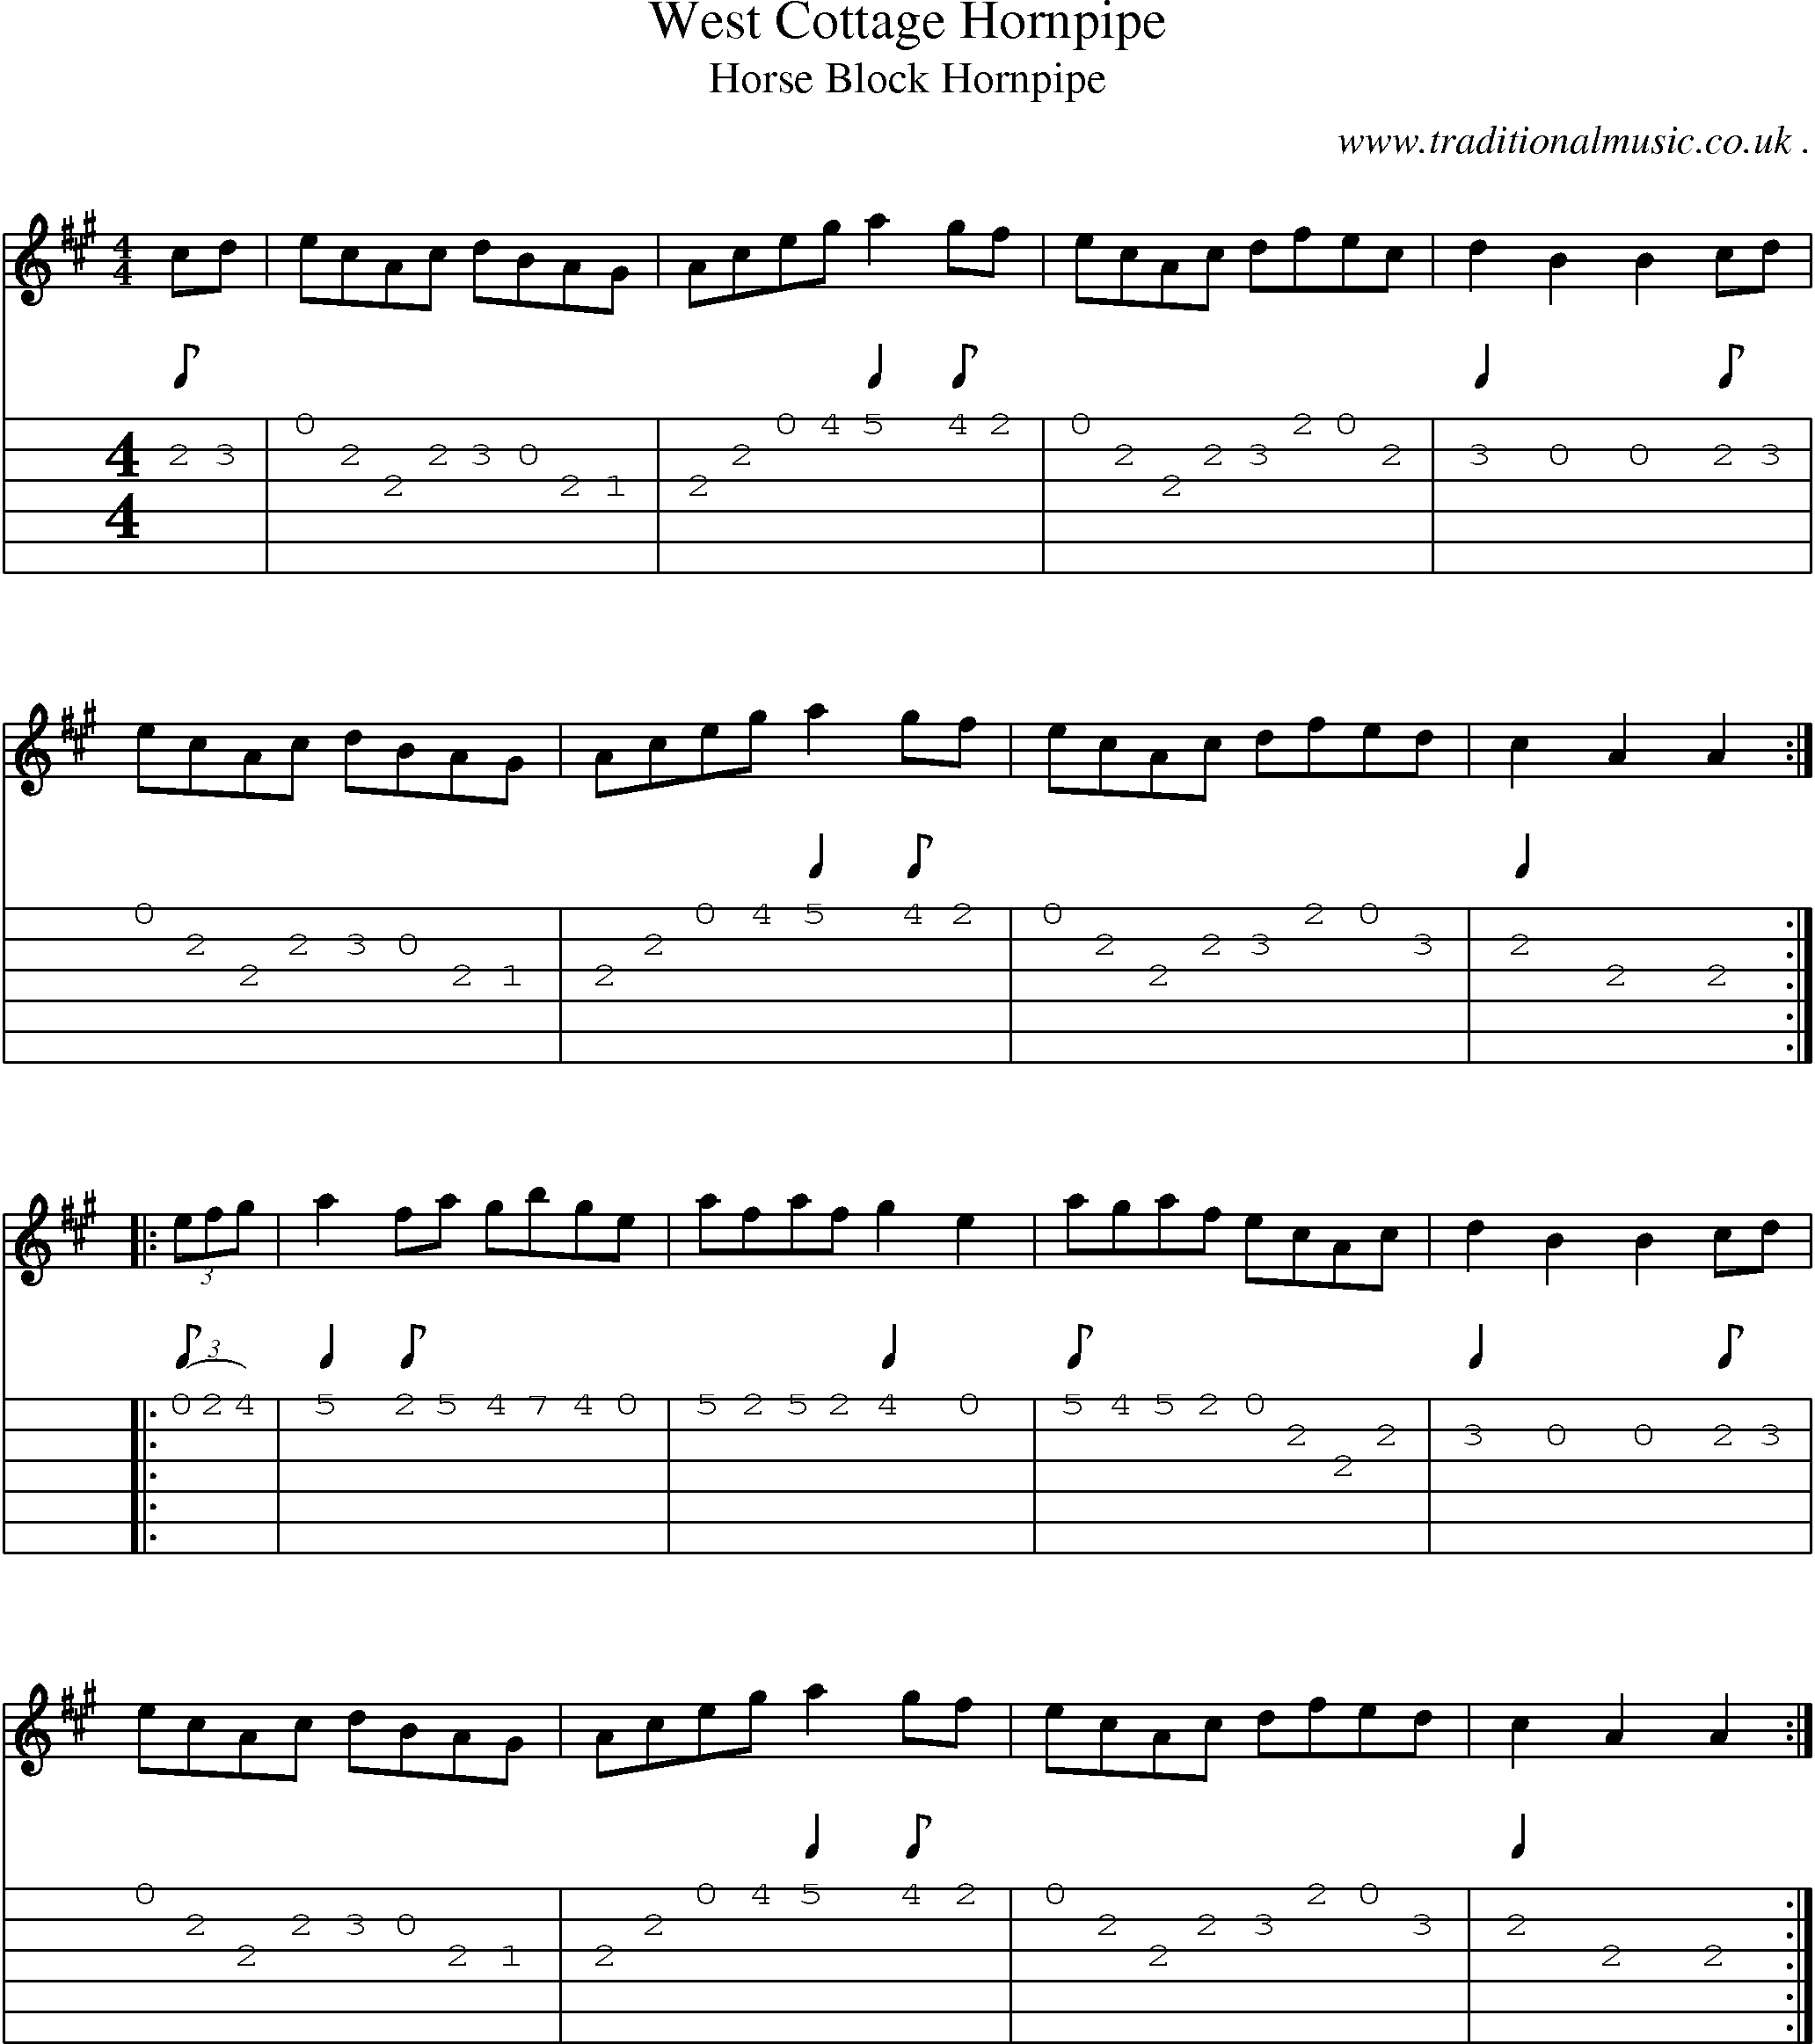 Sheet-Music and Guitar Tabs for West Cottage Hornpipe